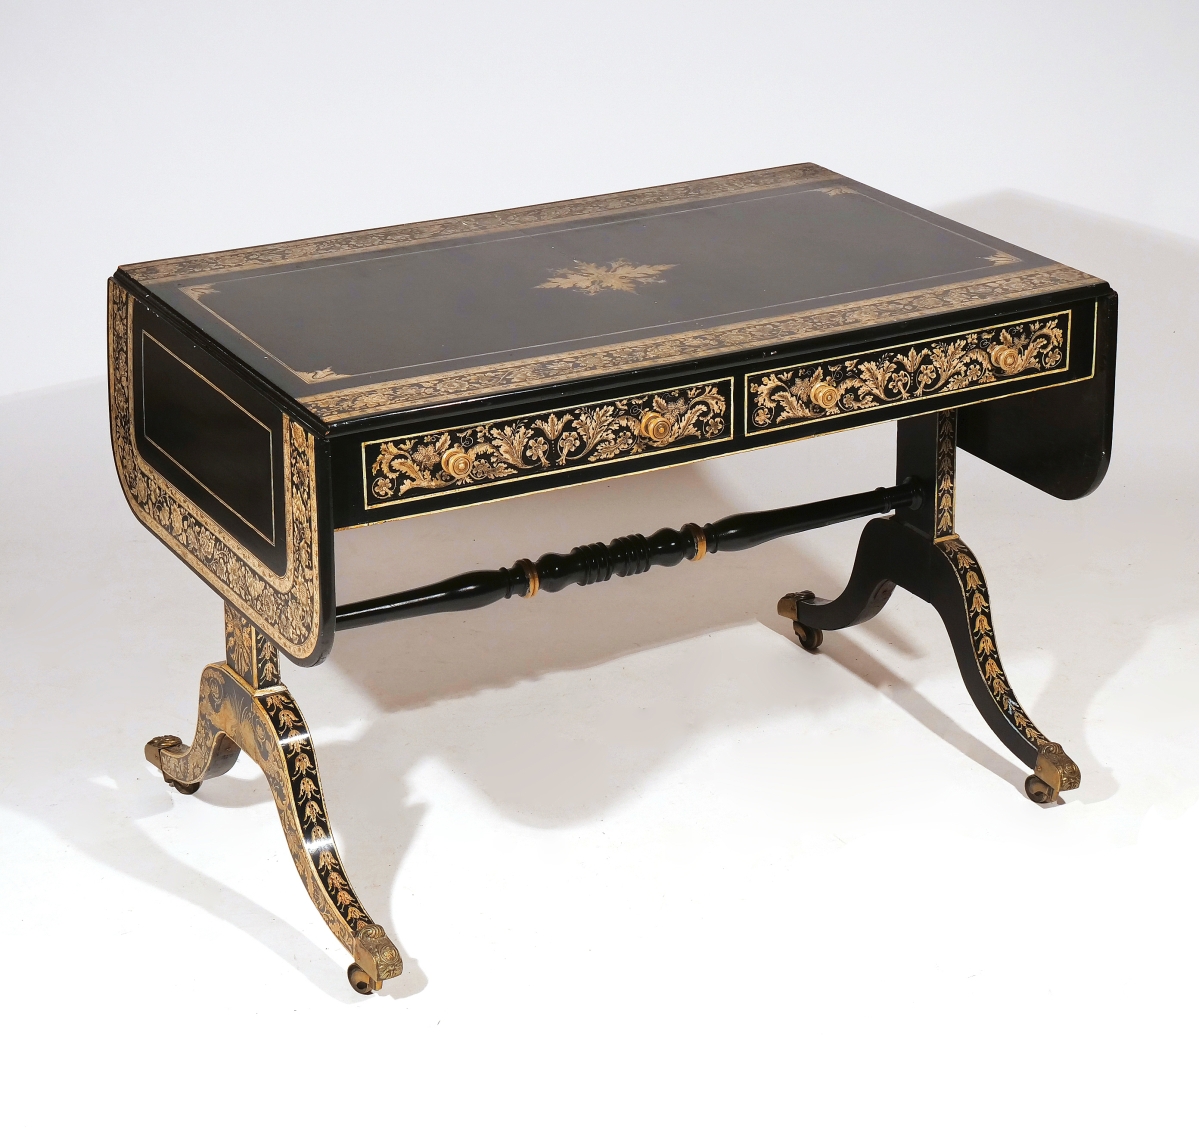 A private New Rochelle, N.Y., collection contributed this early Nineteenth Century English regency sofa table, its black ebonized ground decorated with ornate overall pen work. With two drawers and two frieze drawers, splayed legs with brass caps and casters, it took $28,060.